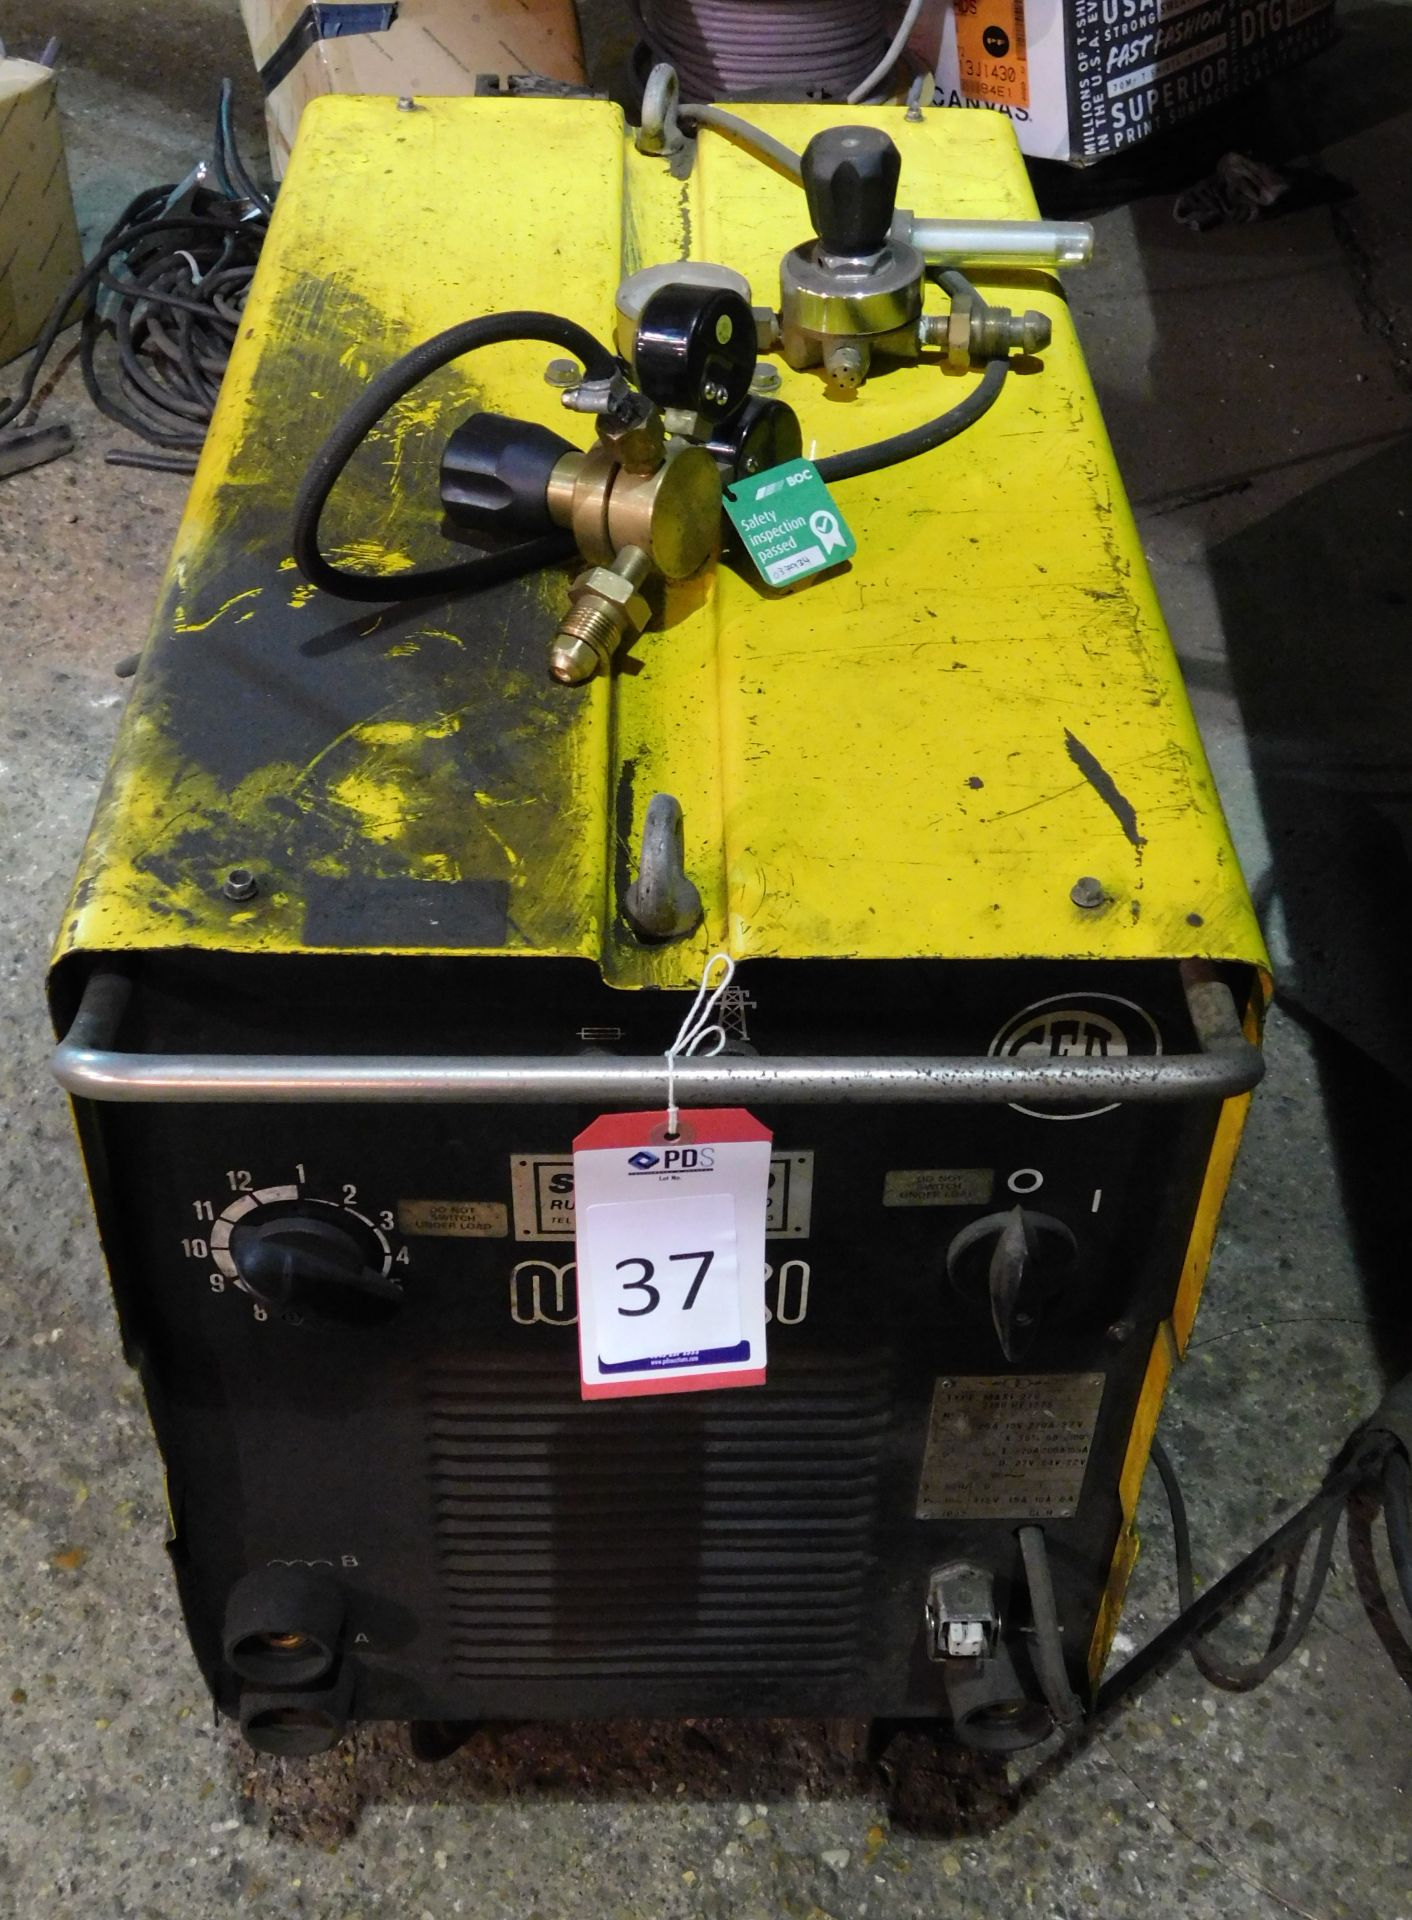 Sureweld Maxi 270 Welder, Serial Number 35977 with Wire Feed (Location: Finedon - Please Refer to